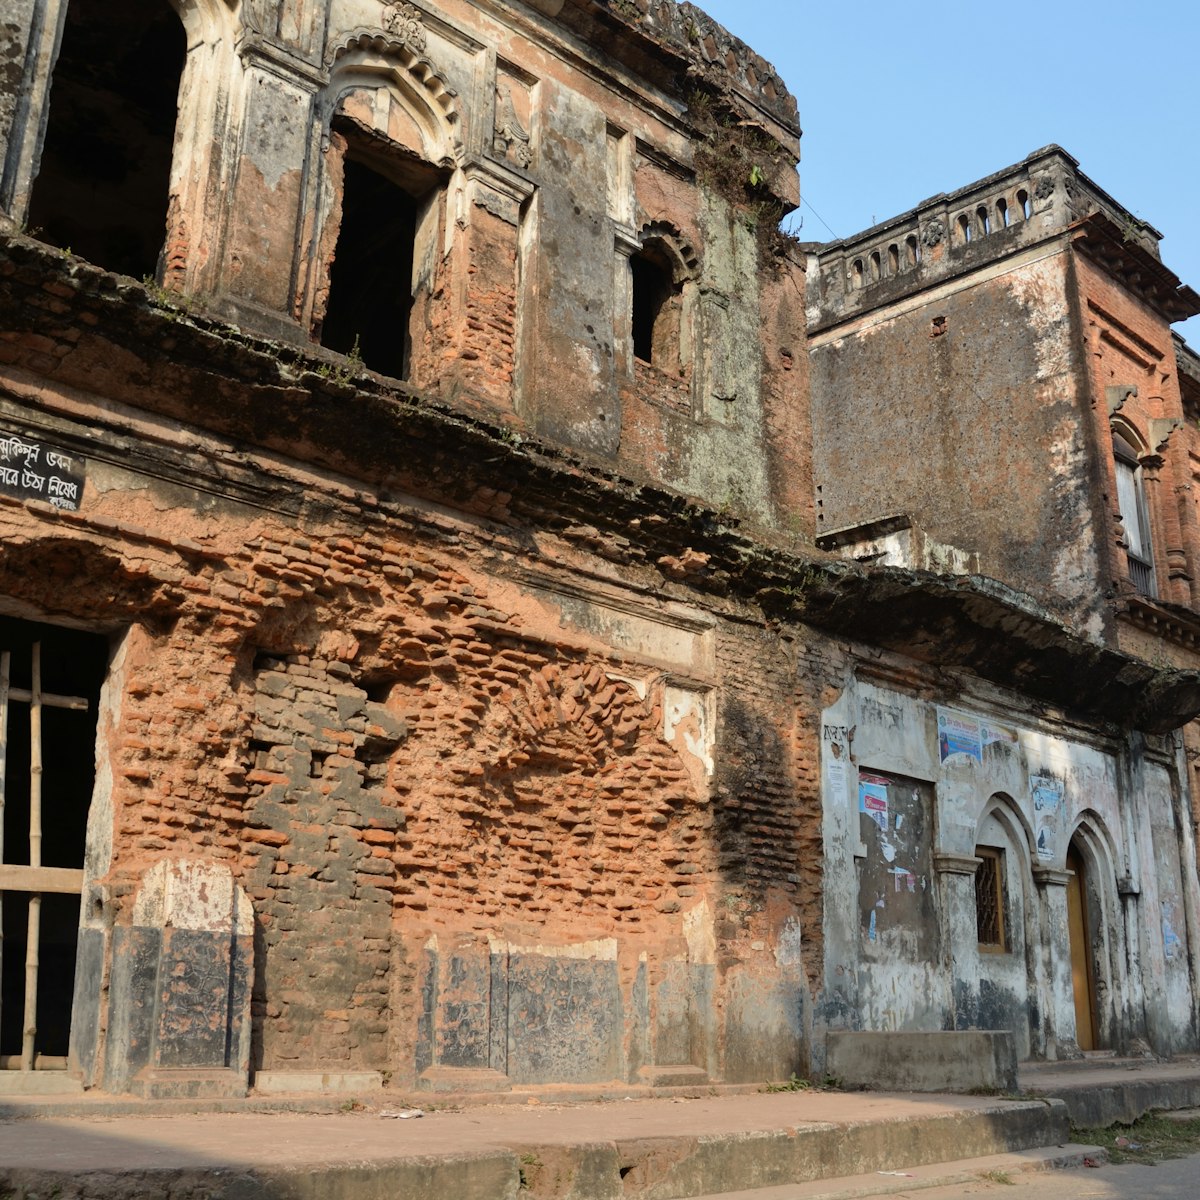 SONARGAON, BANGLADESH - DECEMBER 21: Panam City on December 21, 2012 in Sonargaon, Bangladesh. Panam City was settled by Hindu merchants.But they fled to India when this area became a Muslim region.; Shutterstock ID 124448137; Your name (First / Last): Josh Vogel; Project no. or GL code: 56530; Network activity no. or Cost Centre: Online-Design; Product or Project: 65050/7529/Josh Vogel/LP.com Destination Galleries